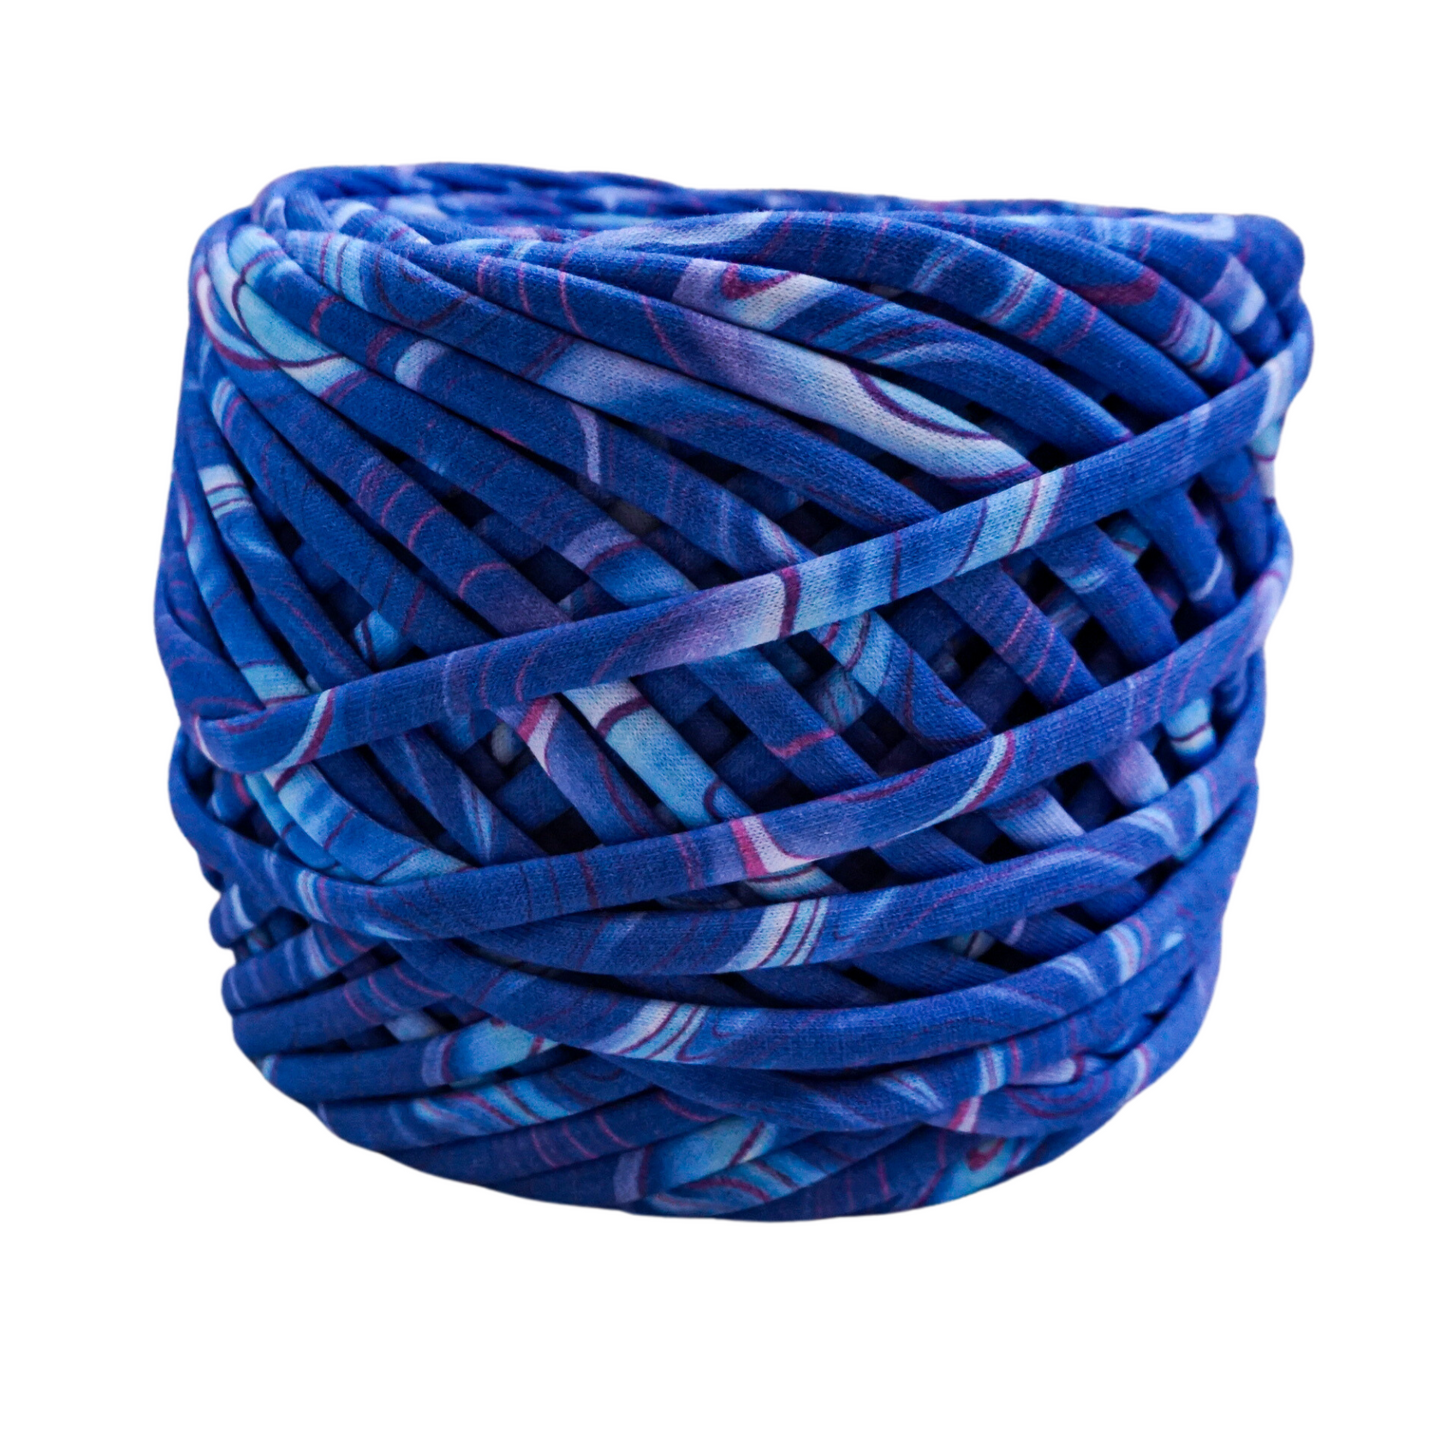 T-shirt yarn for crocheting baskets, bags, rugs and home decor. Blue cosmic